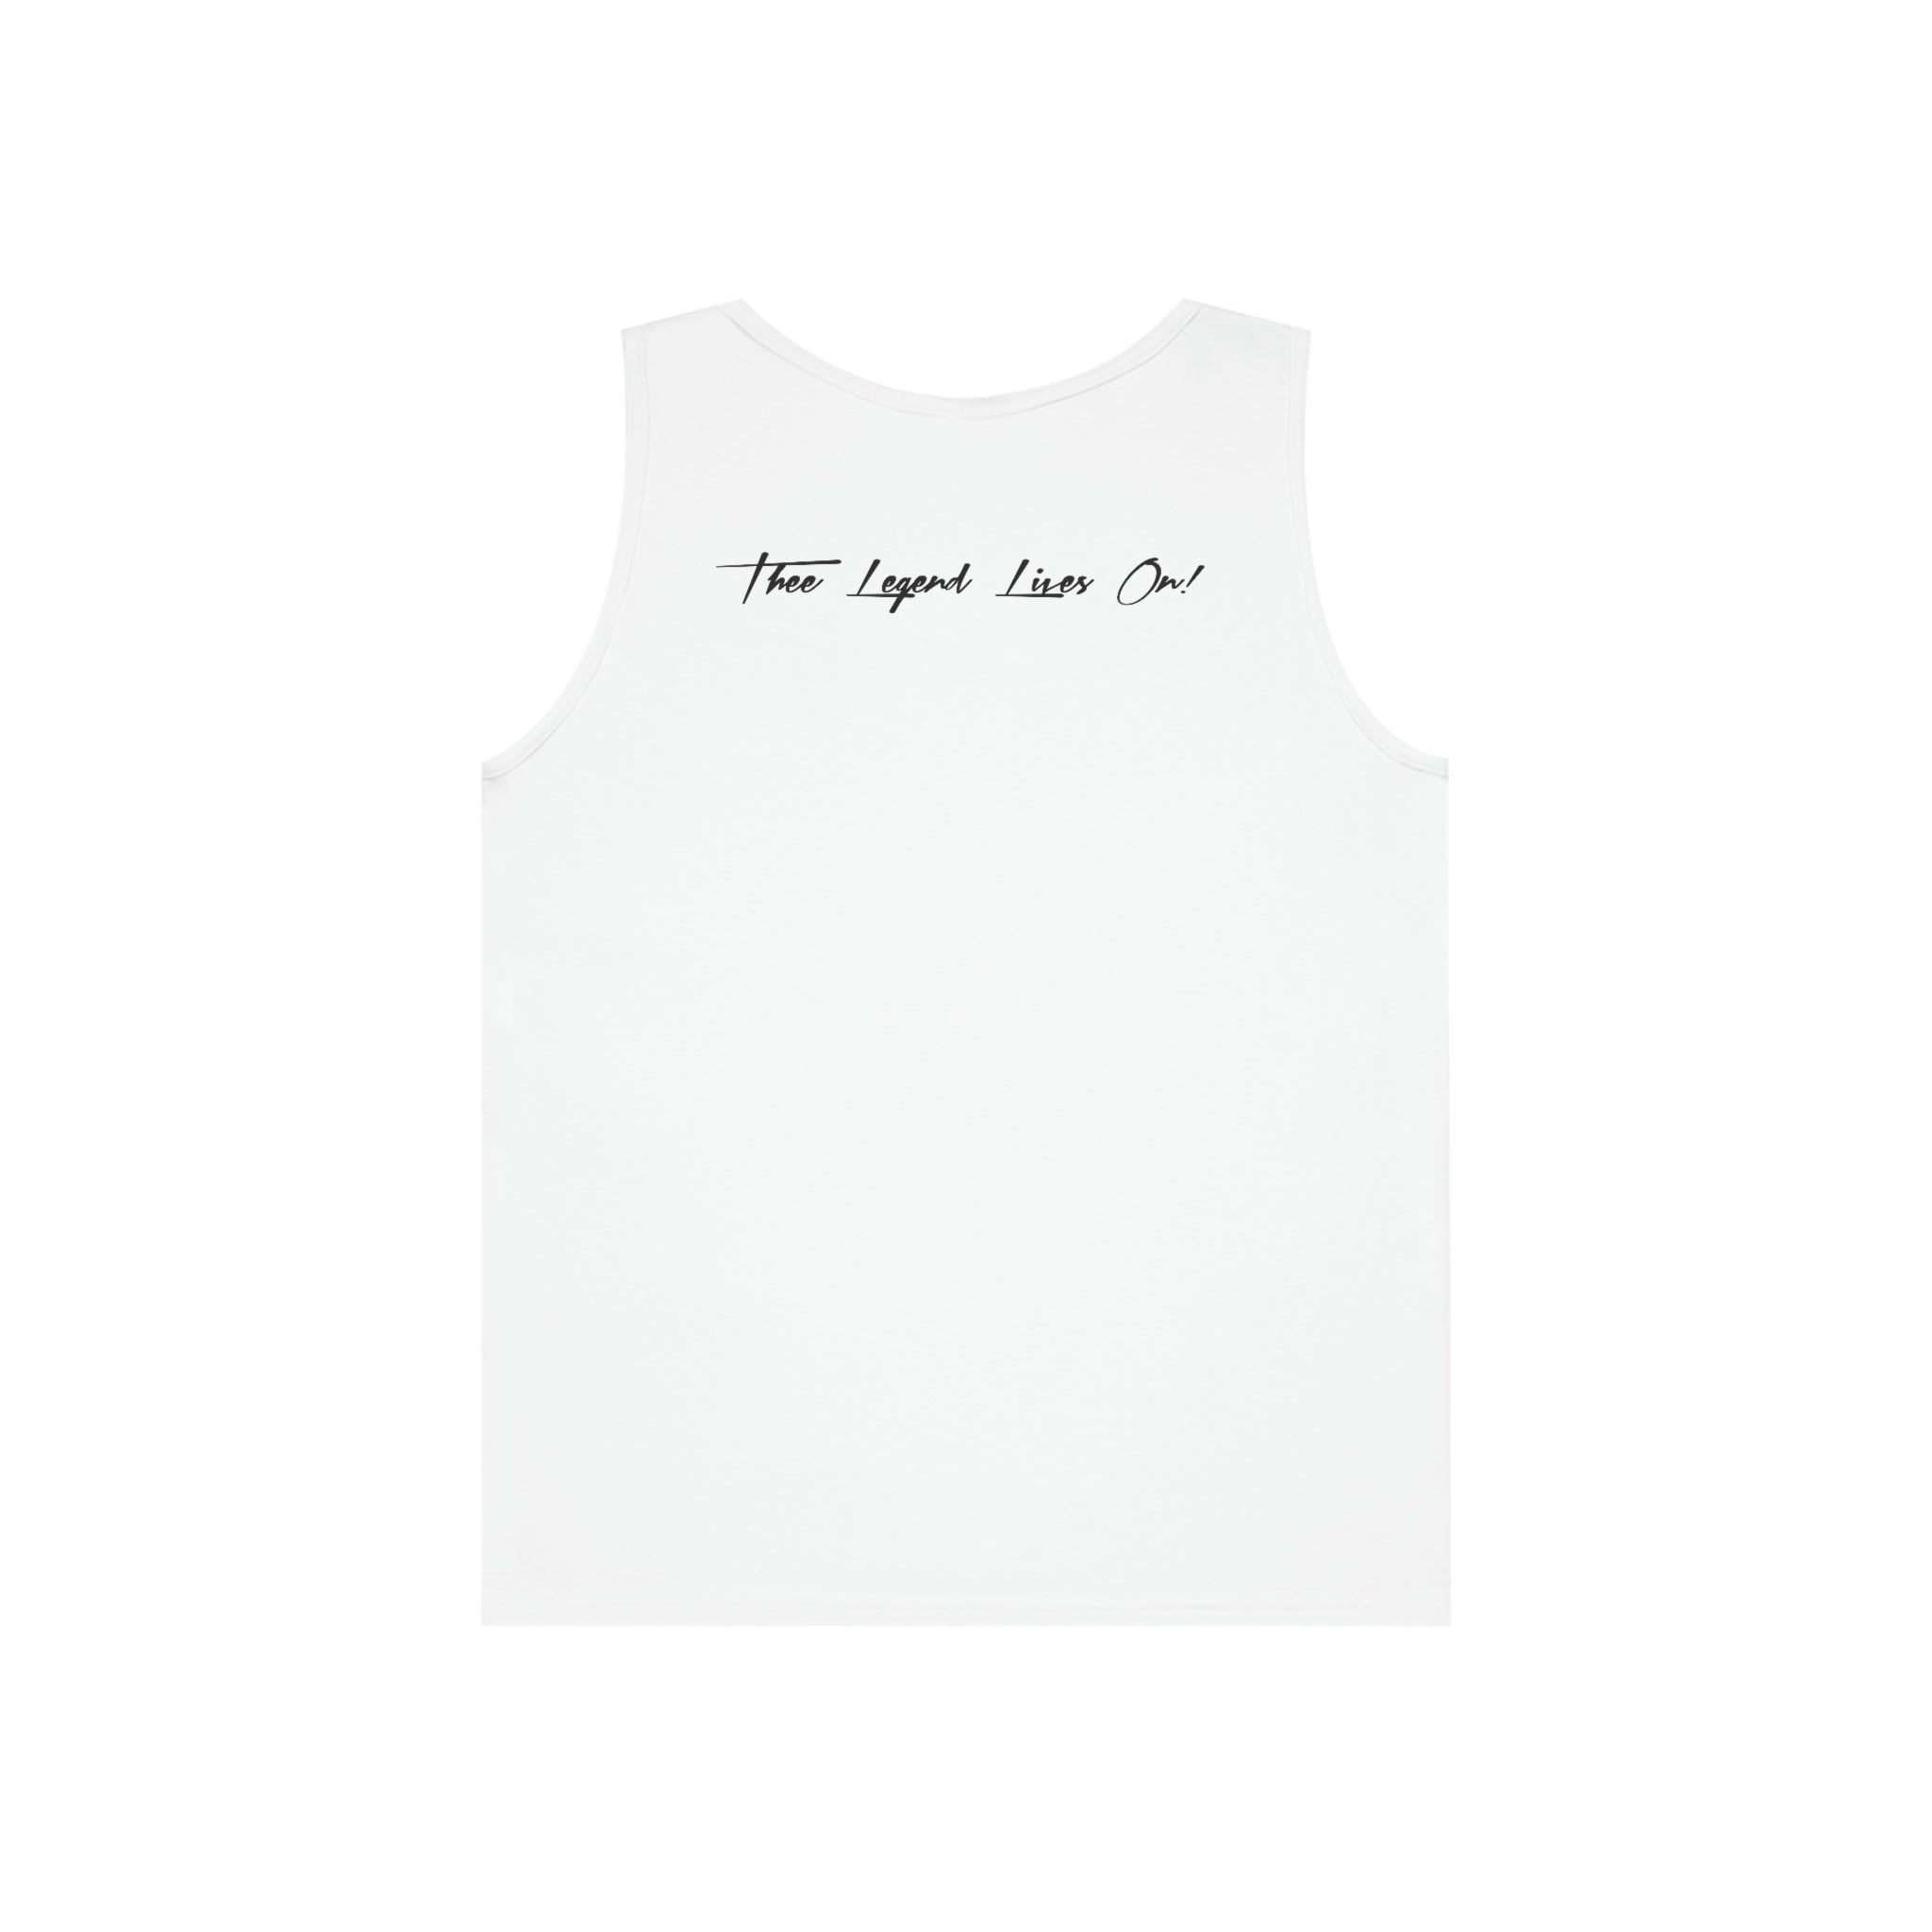 Thee DH MB Logo Unisex Heavy Cotton Tank Top